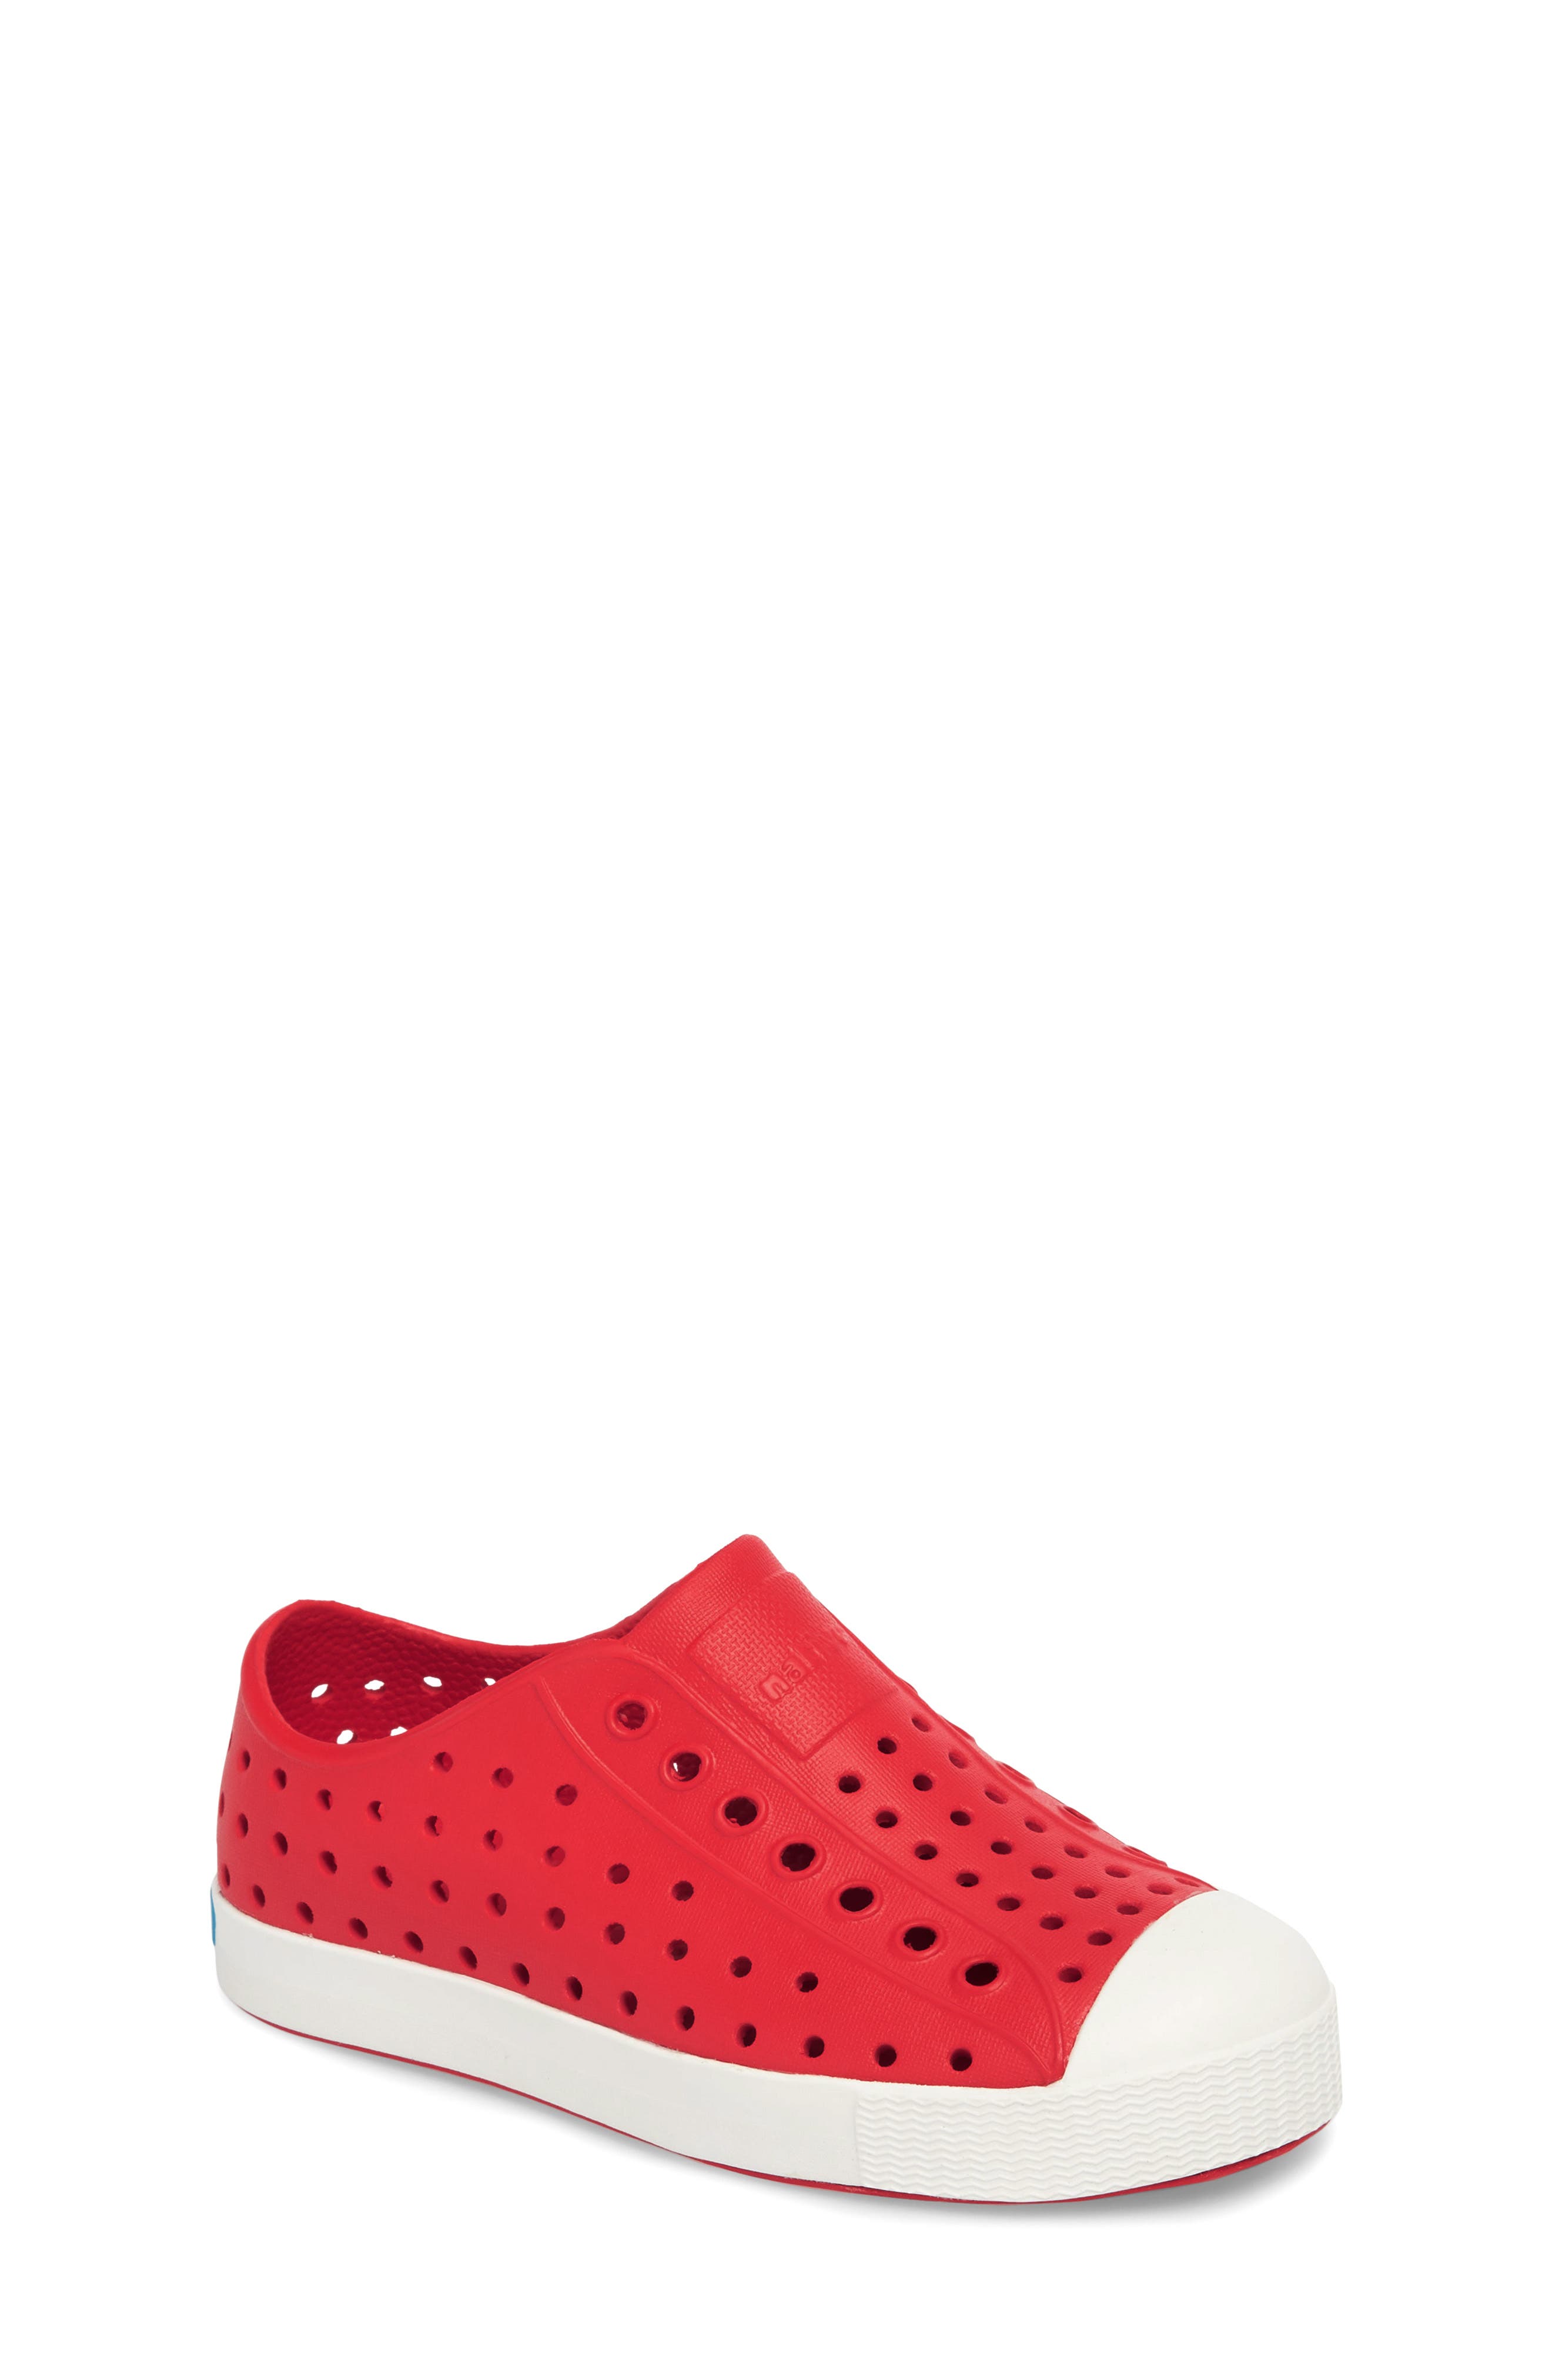 Red Native Shoes | Nordstrom